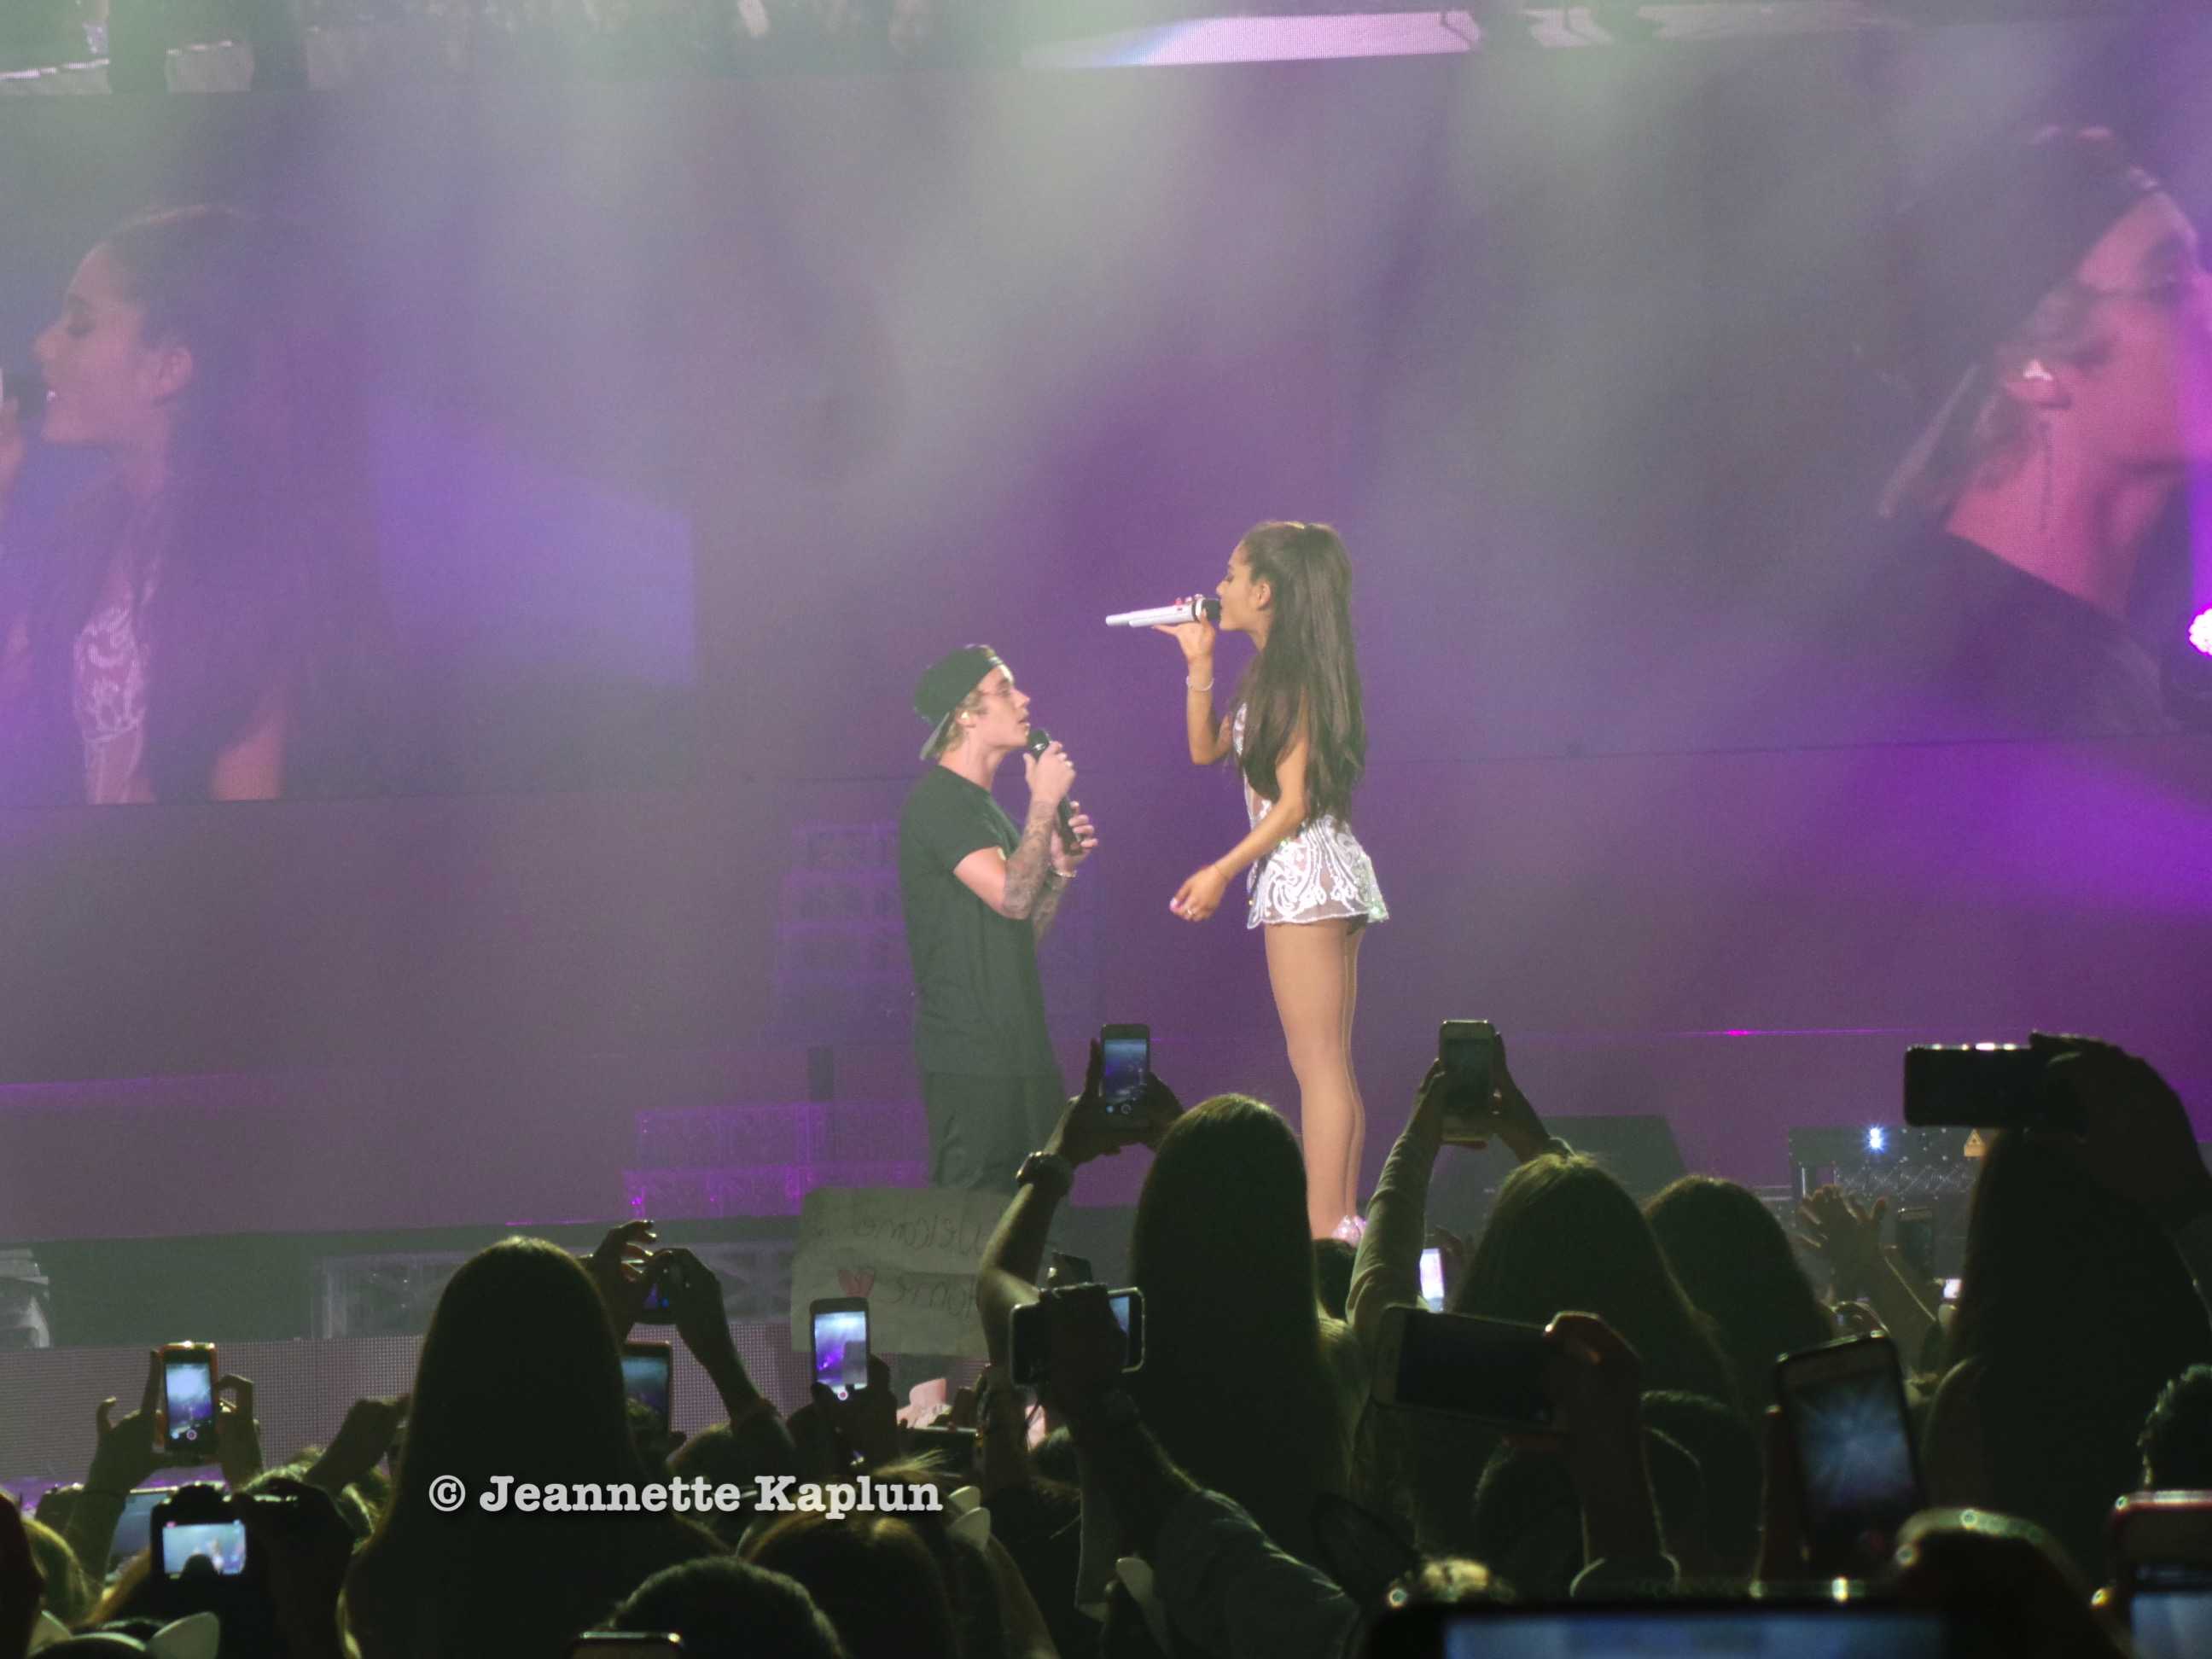 Great photos and video from Ariana Grande’s Miami concert with Justin Bieber